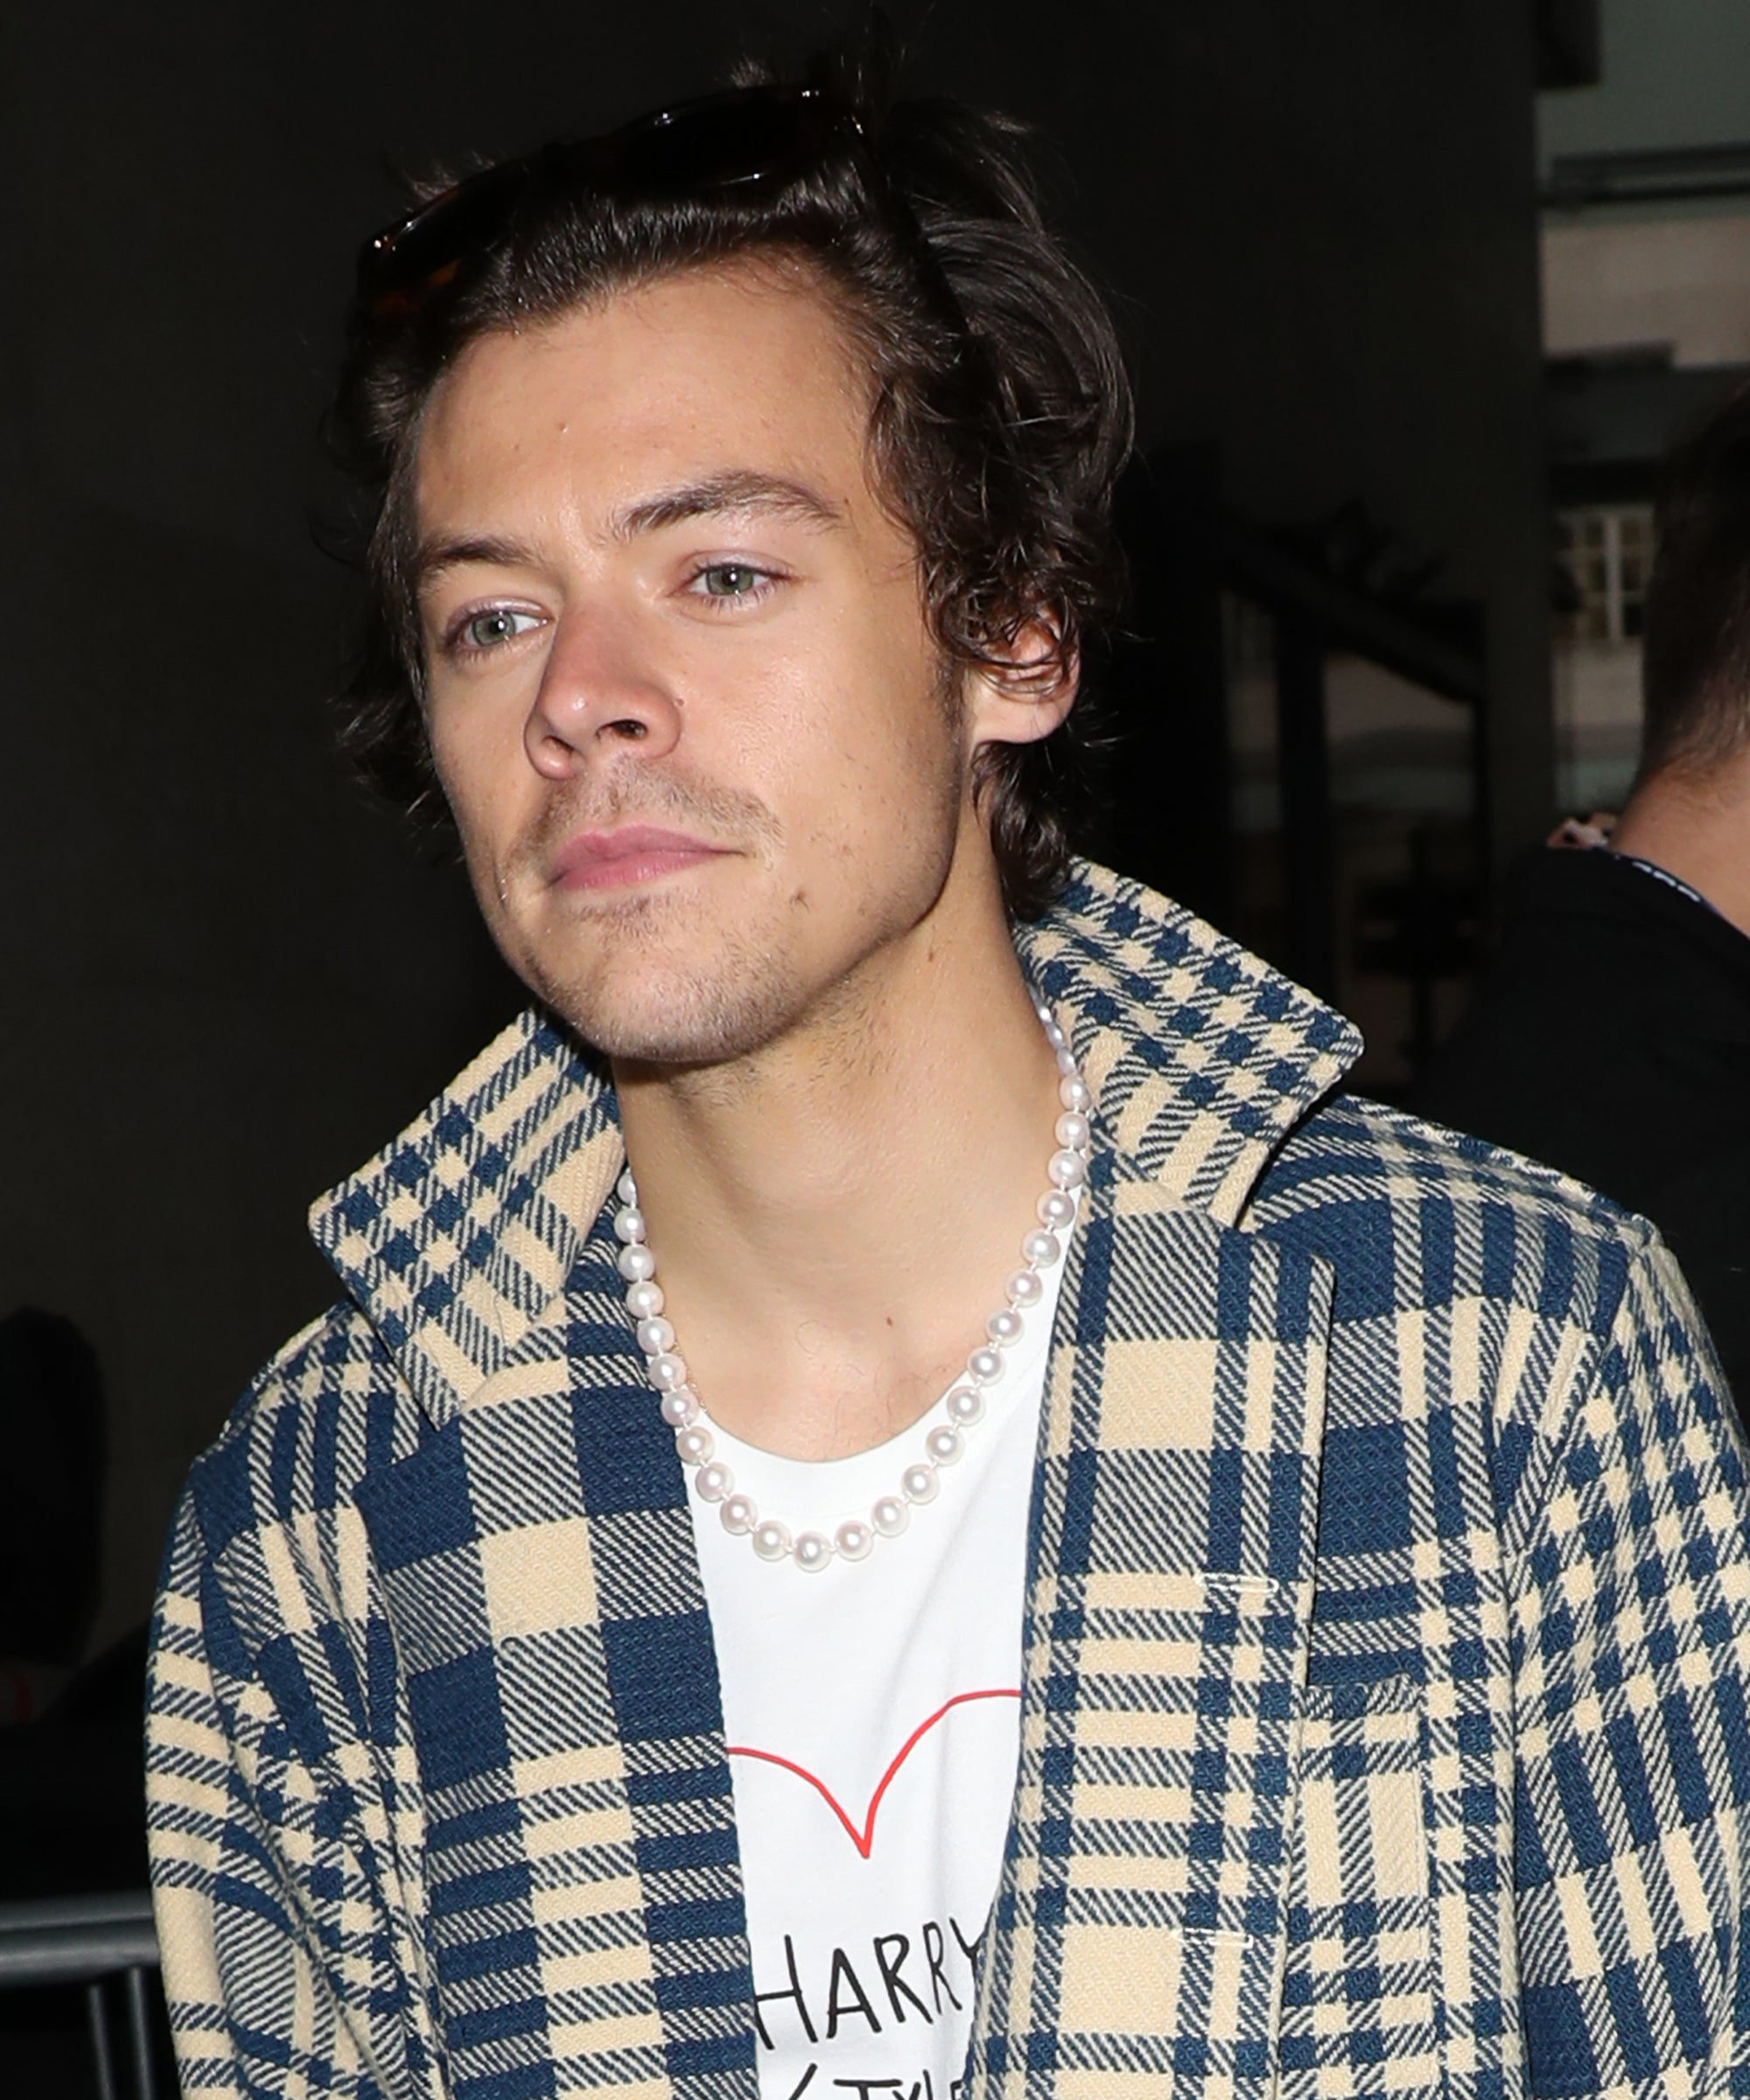 Buy Harry Styles Golden Necklace Harry Styles Inspired Golden Harry Styles  Pearl Necklace Pearl Choker Necklace Online in India - Etsy